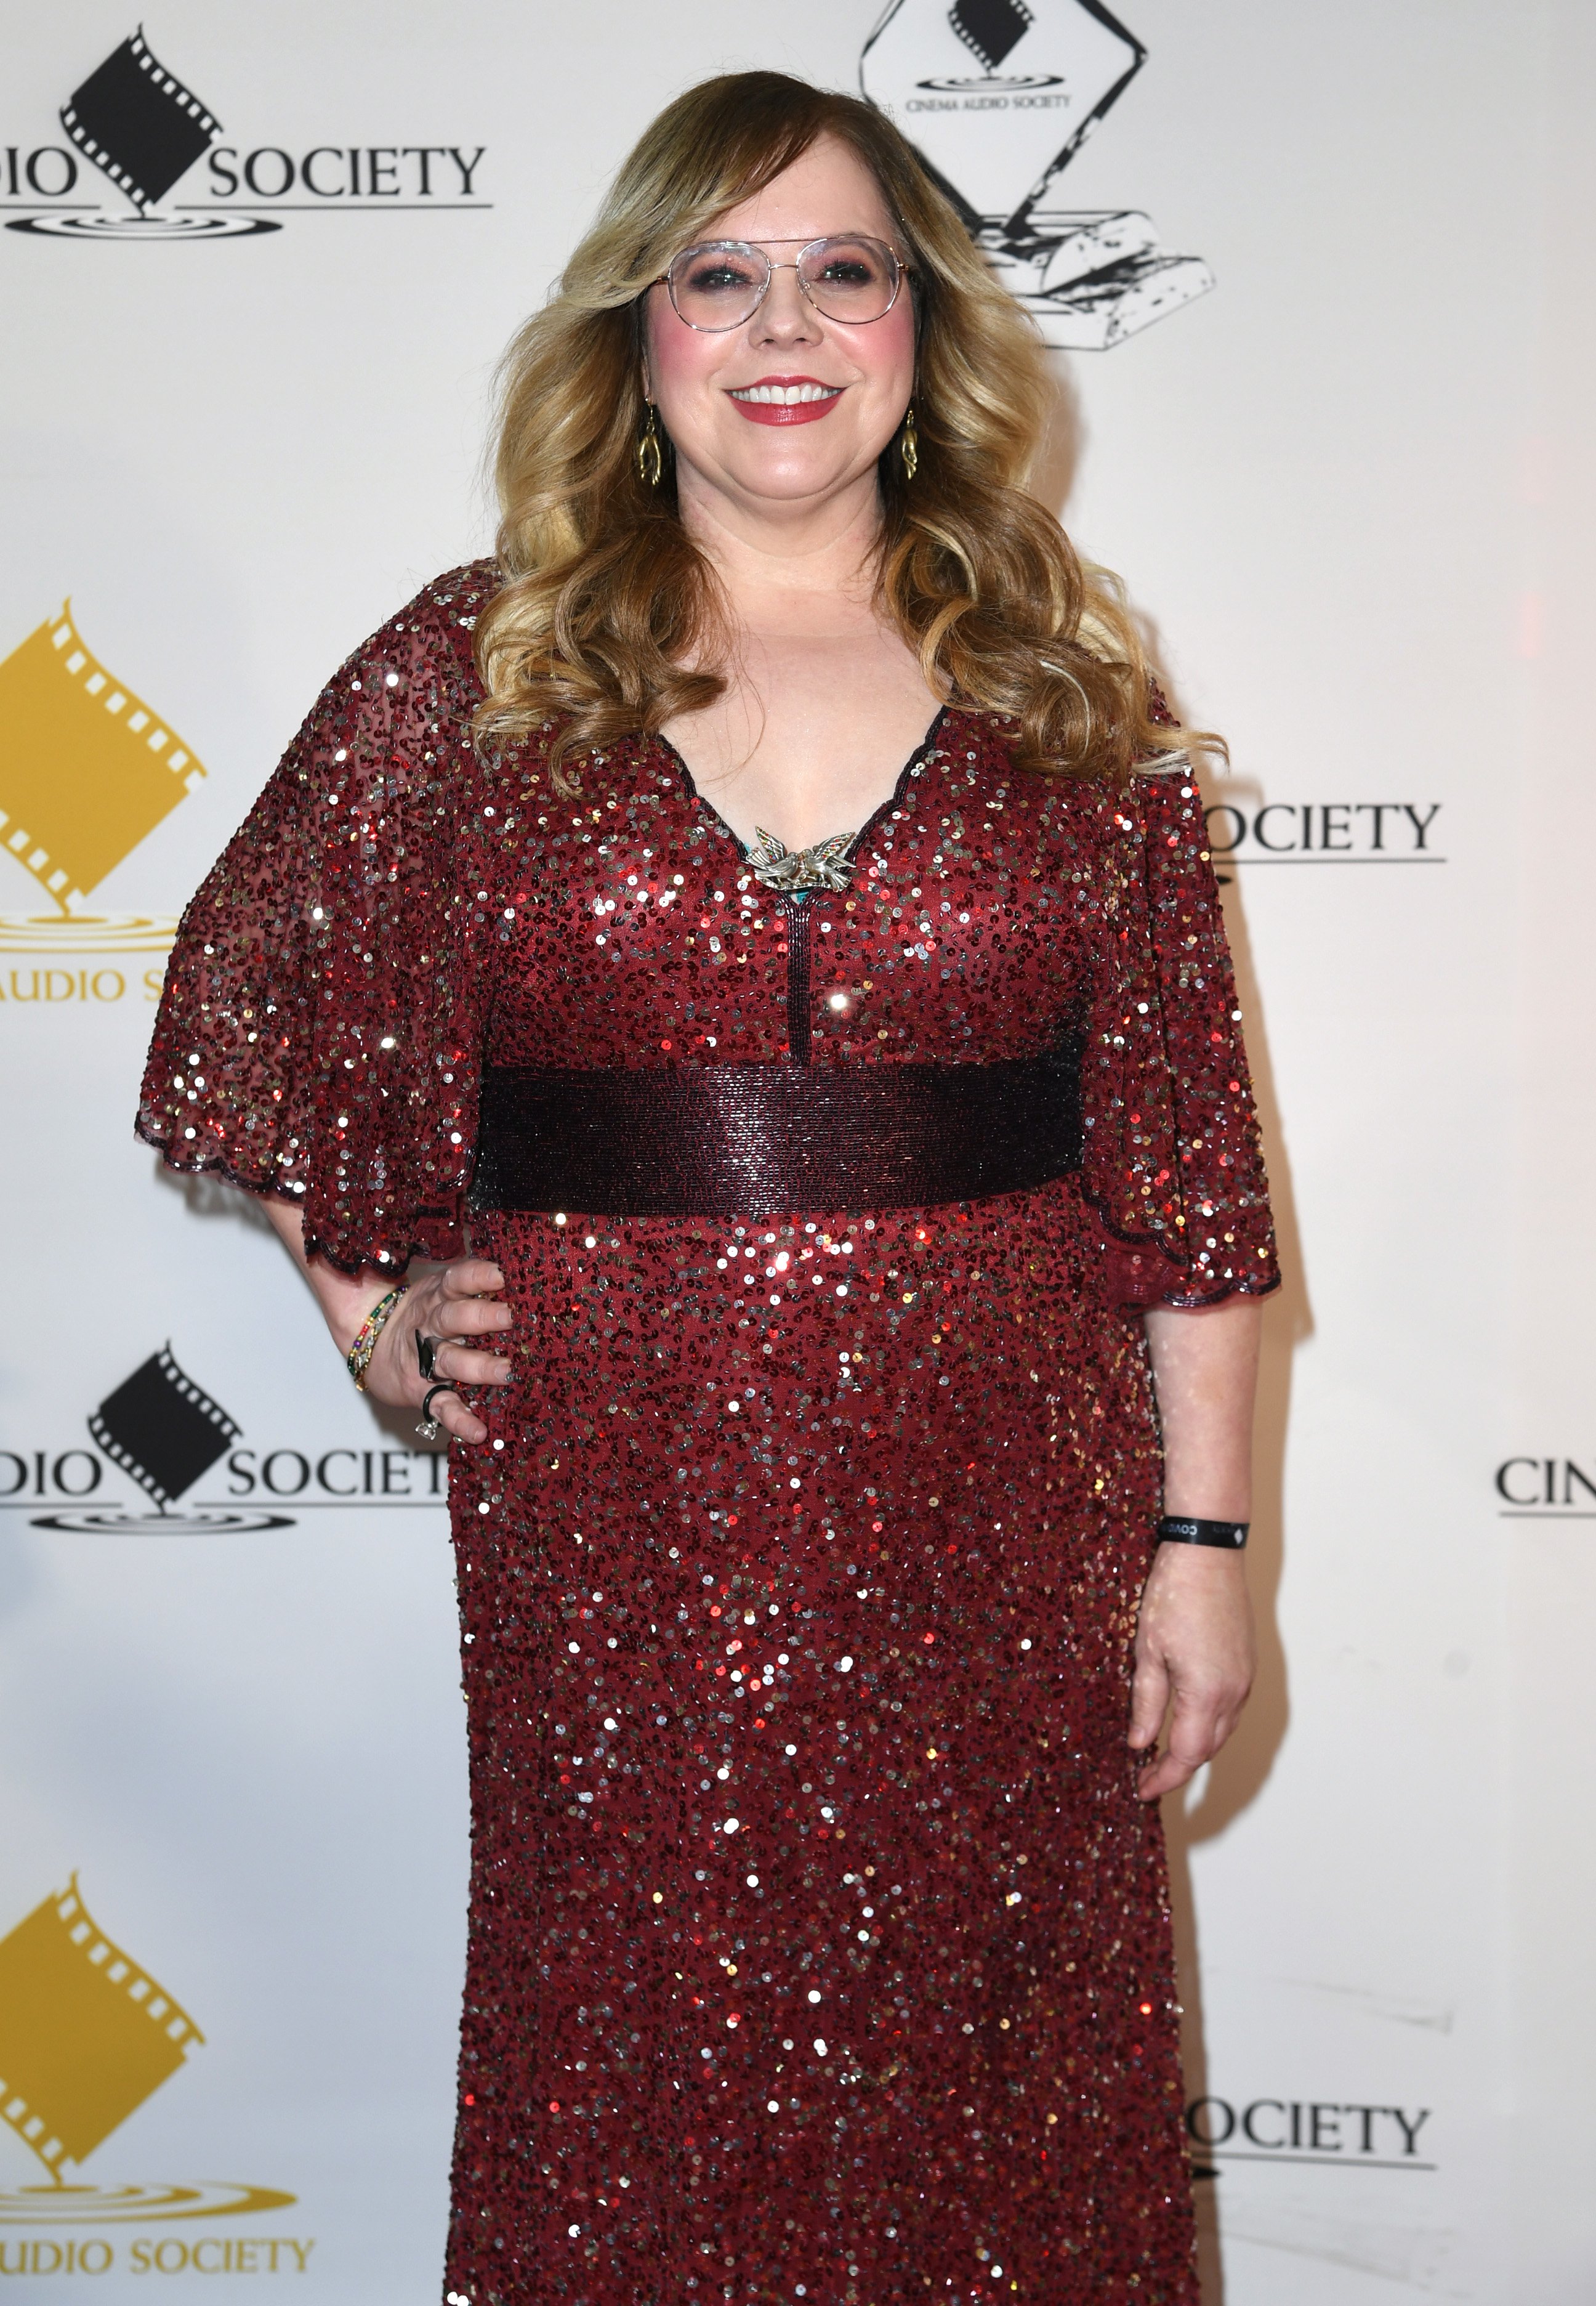 Kirsten Vangsness attends the 58th Cinema Audio Society Awards at InterContinental Los Angeles Downtown on March 19, 2022 in Los Angeles, California. | Source: Getty Images